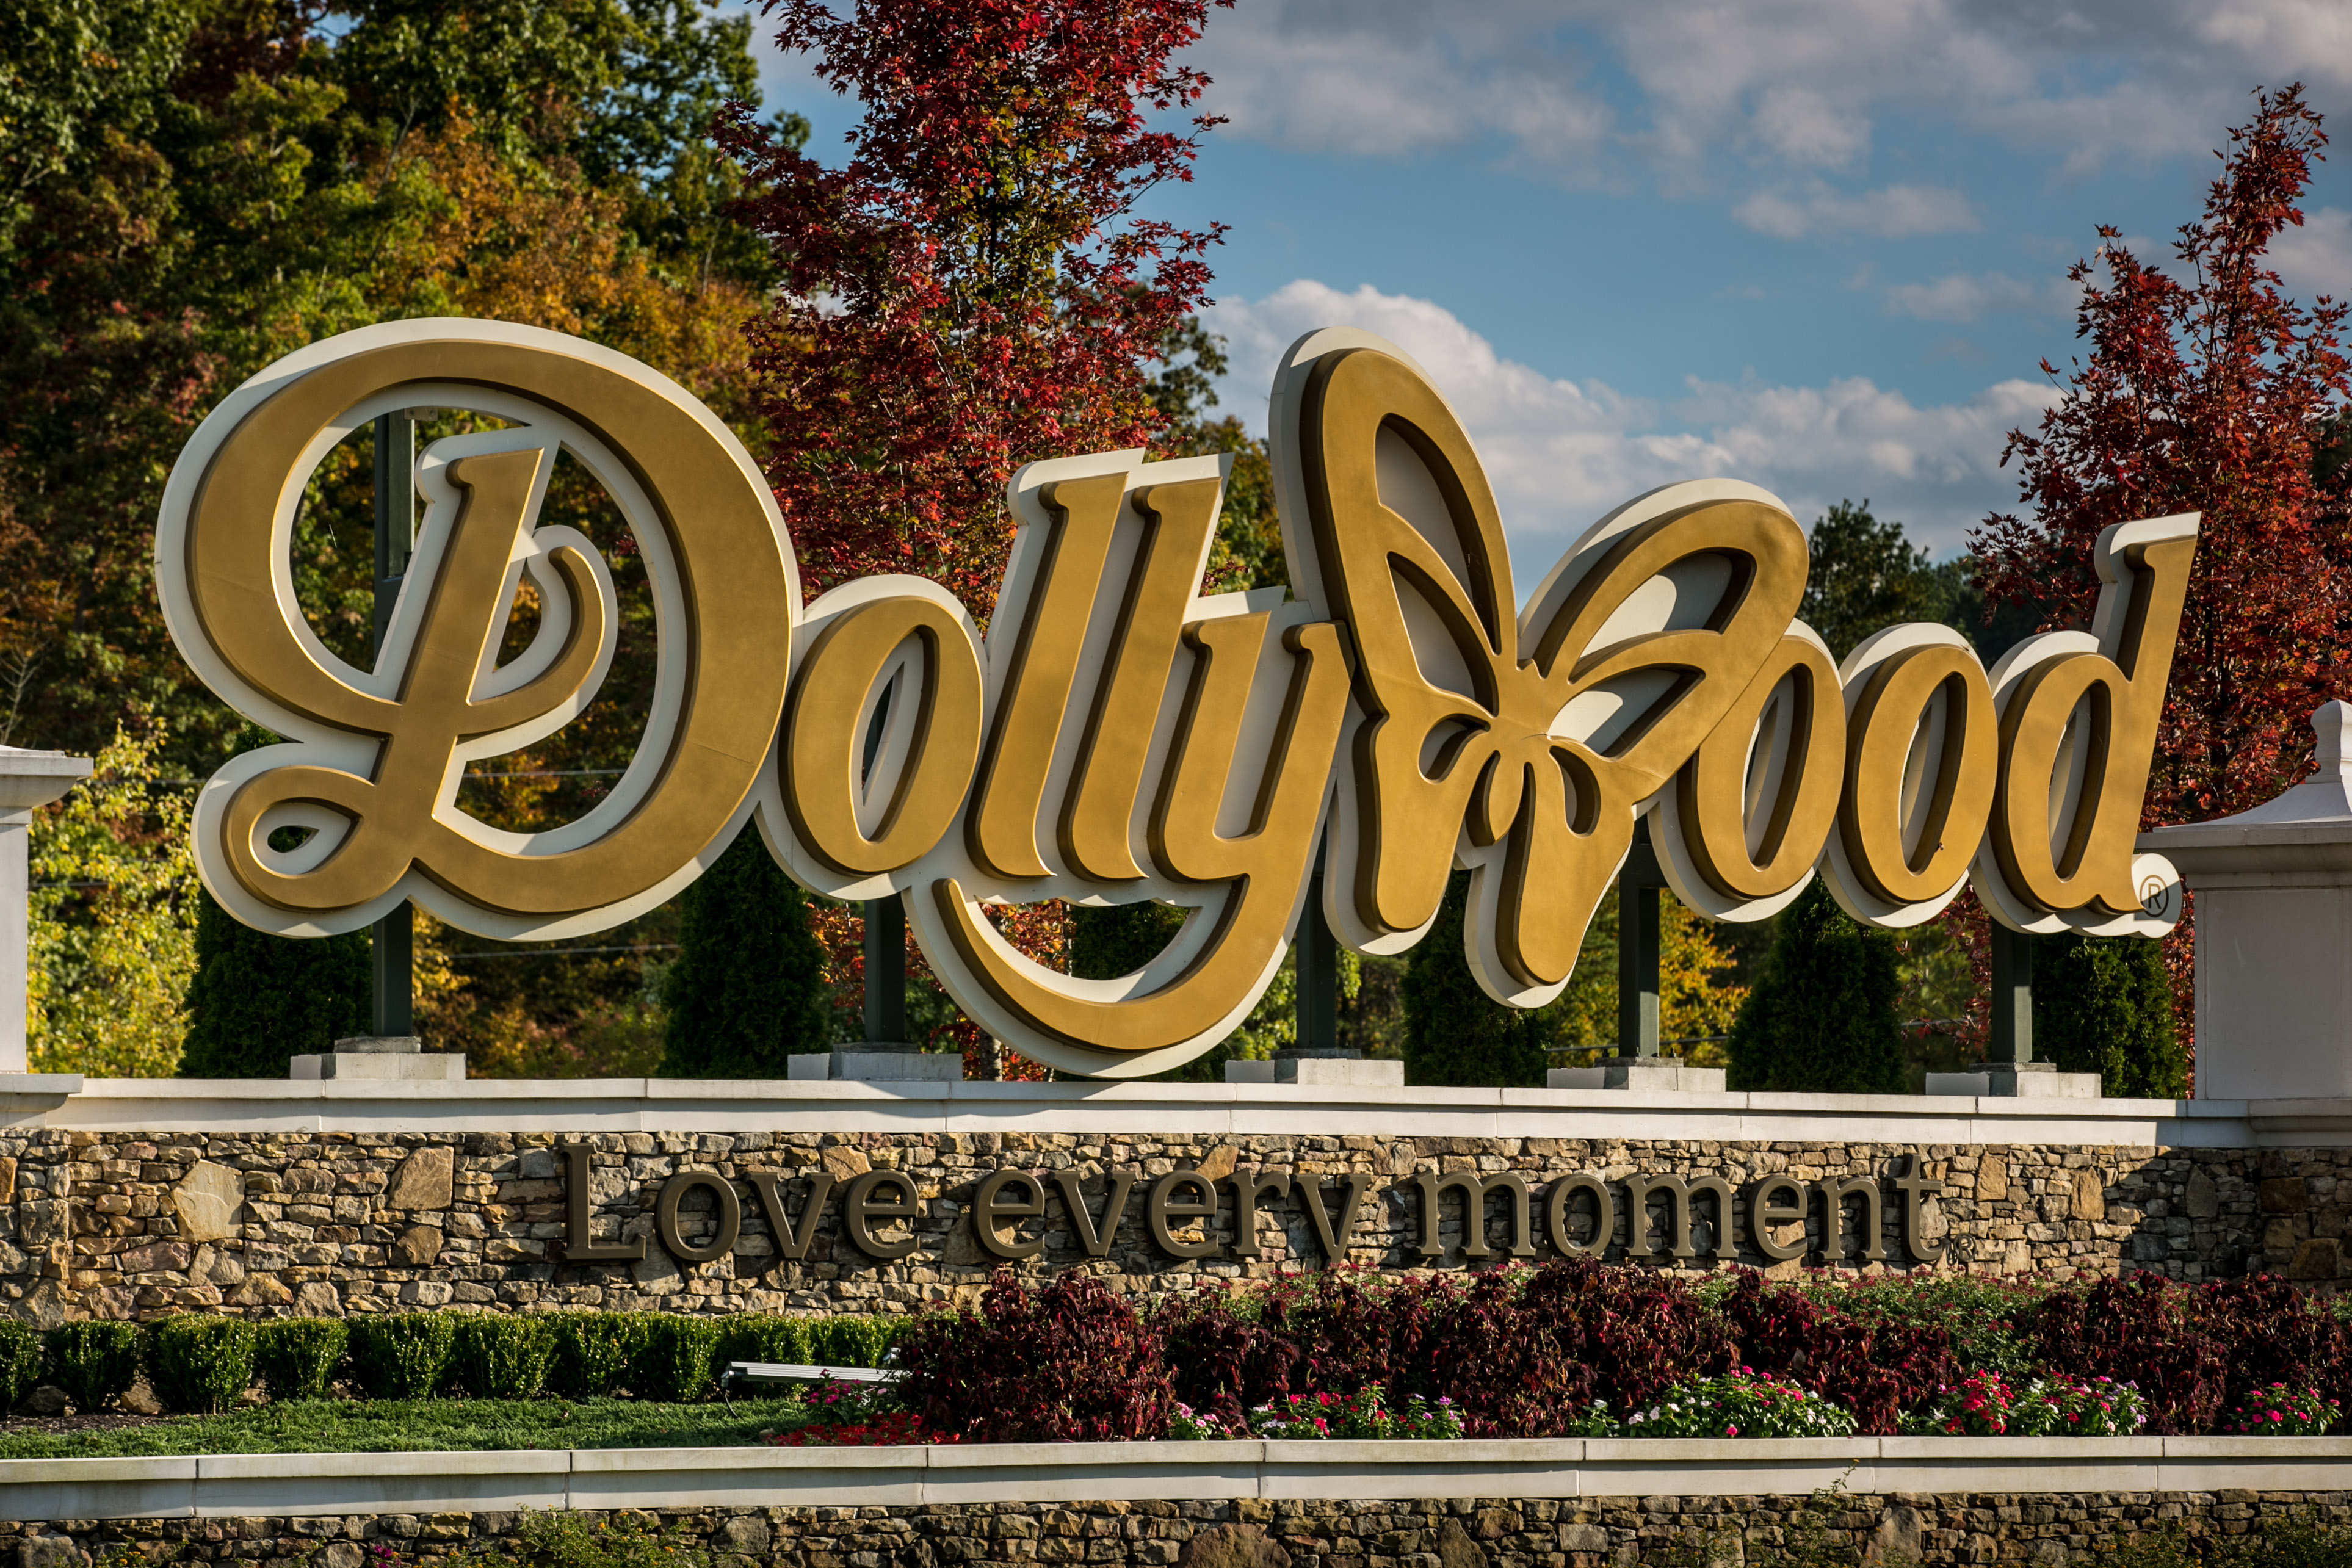  The entrance to Dollywood amusement park